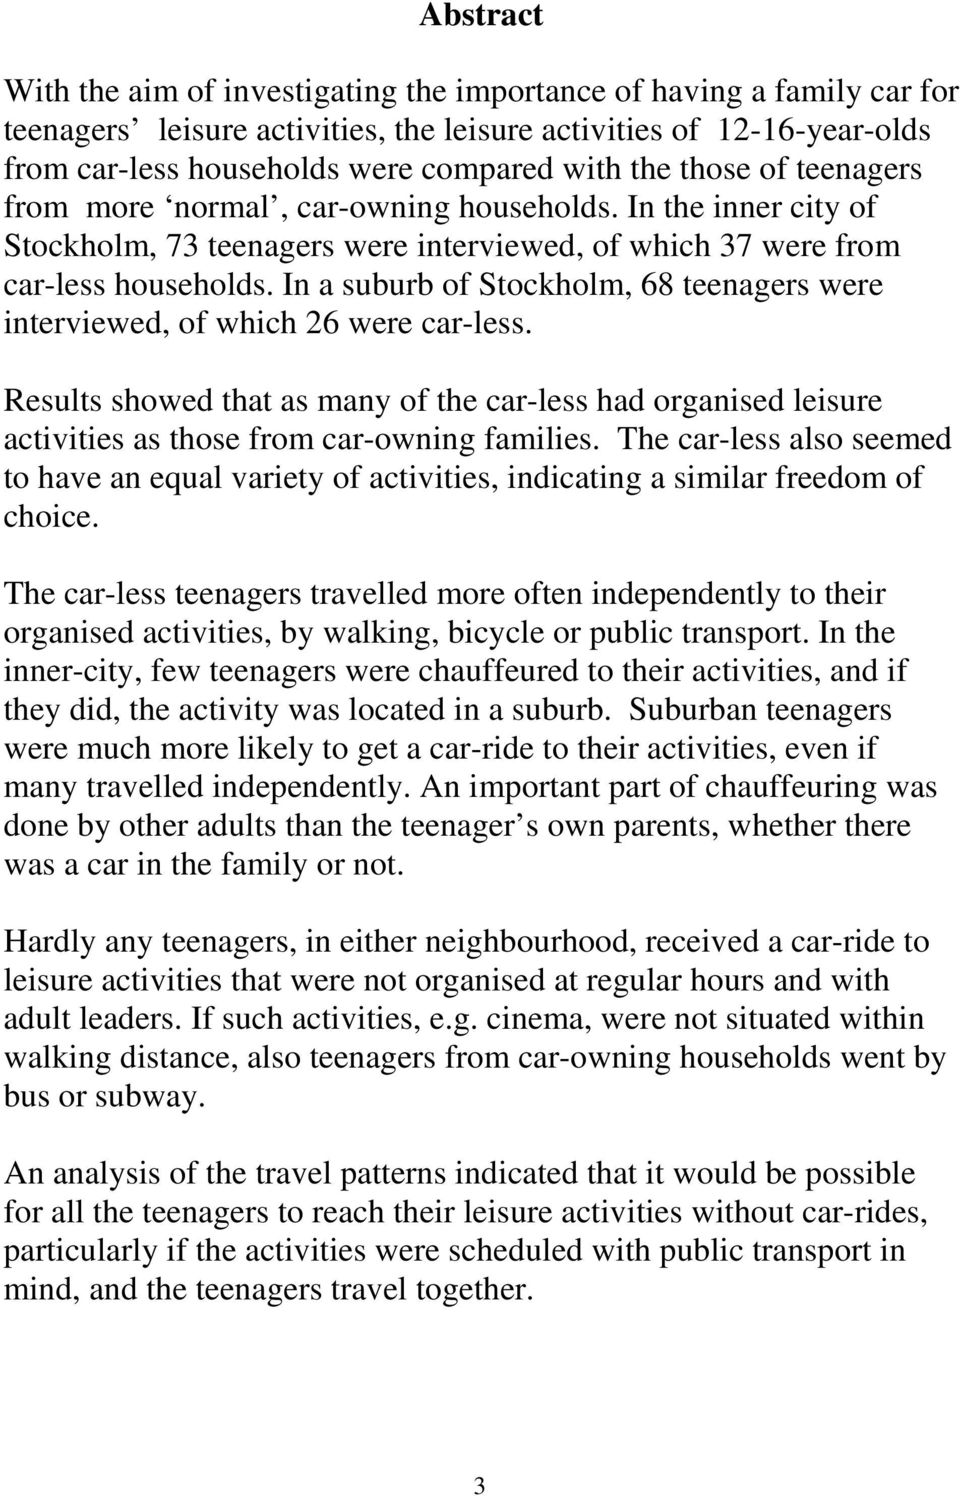 In a suburb of Stockholm, 68 teenagers were interviewed, of which 26 were car-less. Results showed that as many of the car-less had organised leisure activities as those from car-owning families.